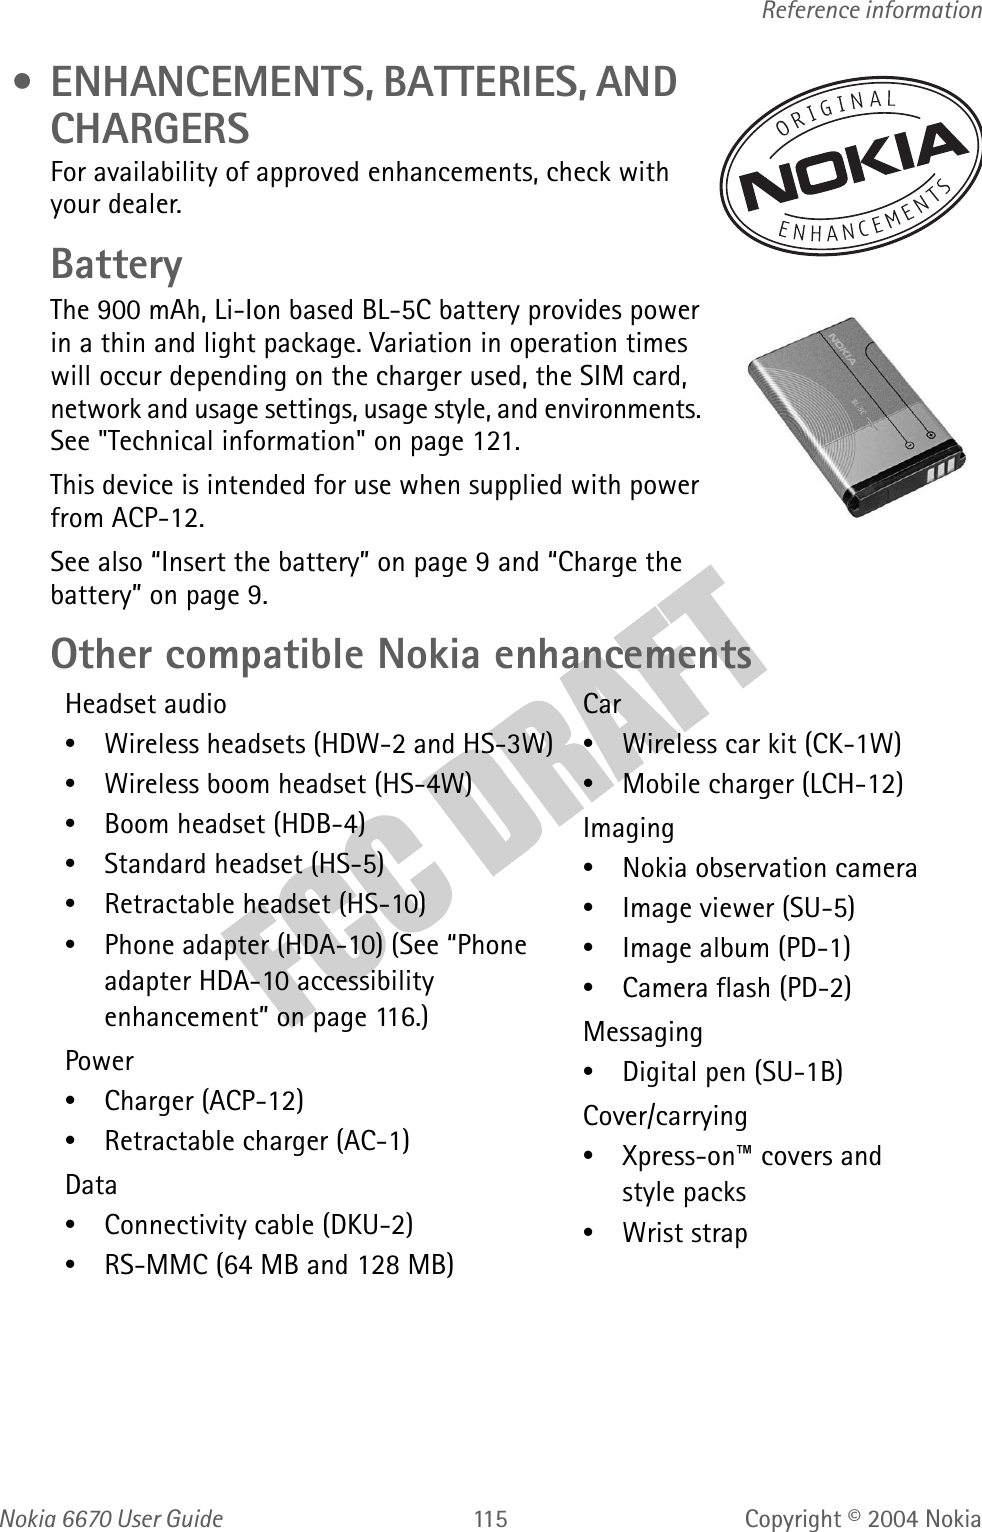 Nokia  User GuideCopyright © 2004 NokiaReference information • ENHANCEMENTS, BATTERIES, AND CHARGERSFor availability of approved enhancements, check with your dealer. BatteryThe 900 mAh, Li-Ion based BL-5C battery provides power in a thin and light package. Variation in operation times will occur depending on the charger used, the SIM card, network and usage settings, usage style, and environments. See &quot;Technical information&quot; on page 121. This device is intended for use when supplied with power from ACP-12.See also “Insert the battery” on page 9 and “Charge the battery” on page 9.Other compatible Nokia enhancementsHeadset audio•Wireless headsets (HDW-2 and HS-3W)•Wireless boom headset (HS-4W)•Boom headset (HDB-4)•Standard headset (HS-5)•Retractable headset (HS-10)•Phone adapter (HDA-10) (See “Phone adapter HDA-10 accessibility enhancement” on page 116.)Power•Charger (ACP-12)•Retractable charger (AC-1)Data•Connectivity cable (DKU-2)•RS-MMC (64 MB and 128 MB)Car•Wireless car kit (CK-1W)•Mobile charger (LCH-12)Imaging•Nokia observation camera•Image viewer (SU-5)•Image album (PD-1)•Camera flash (PD-2)Messaging•Digital pen (SU-1B)Cover/carrying•Xpress-on™ covers and style packs•Wrist strap